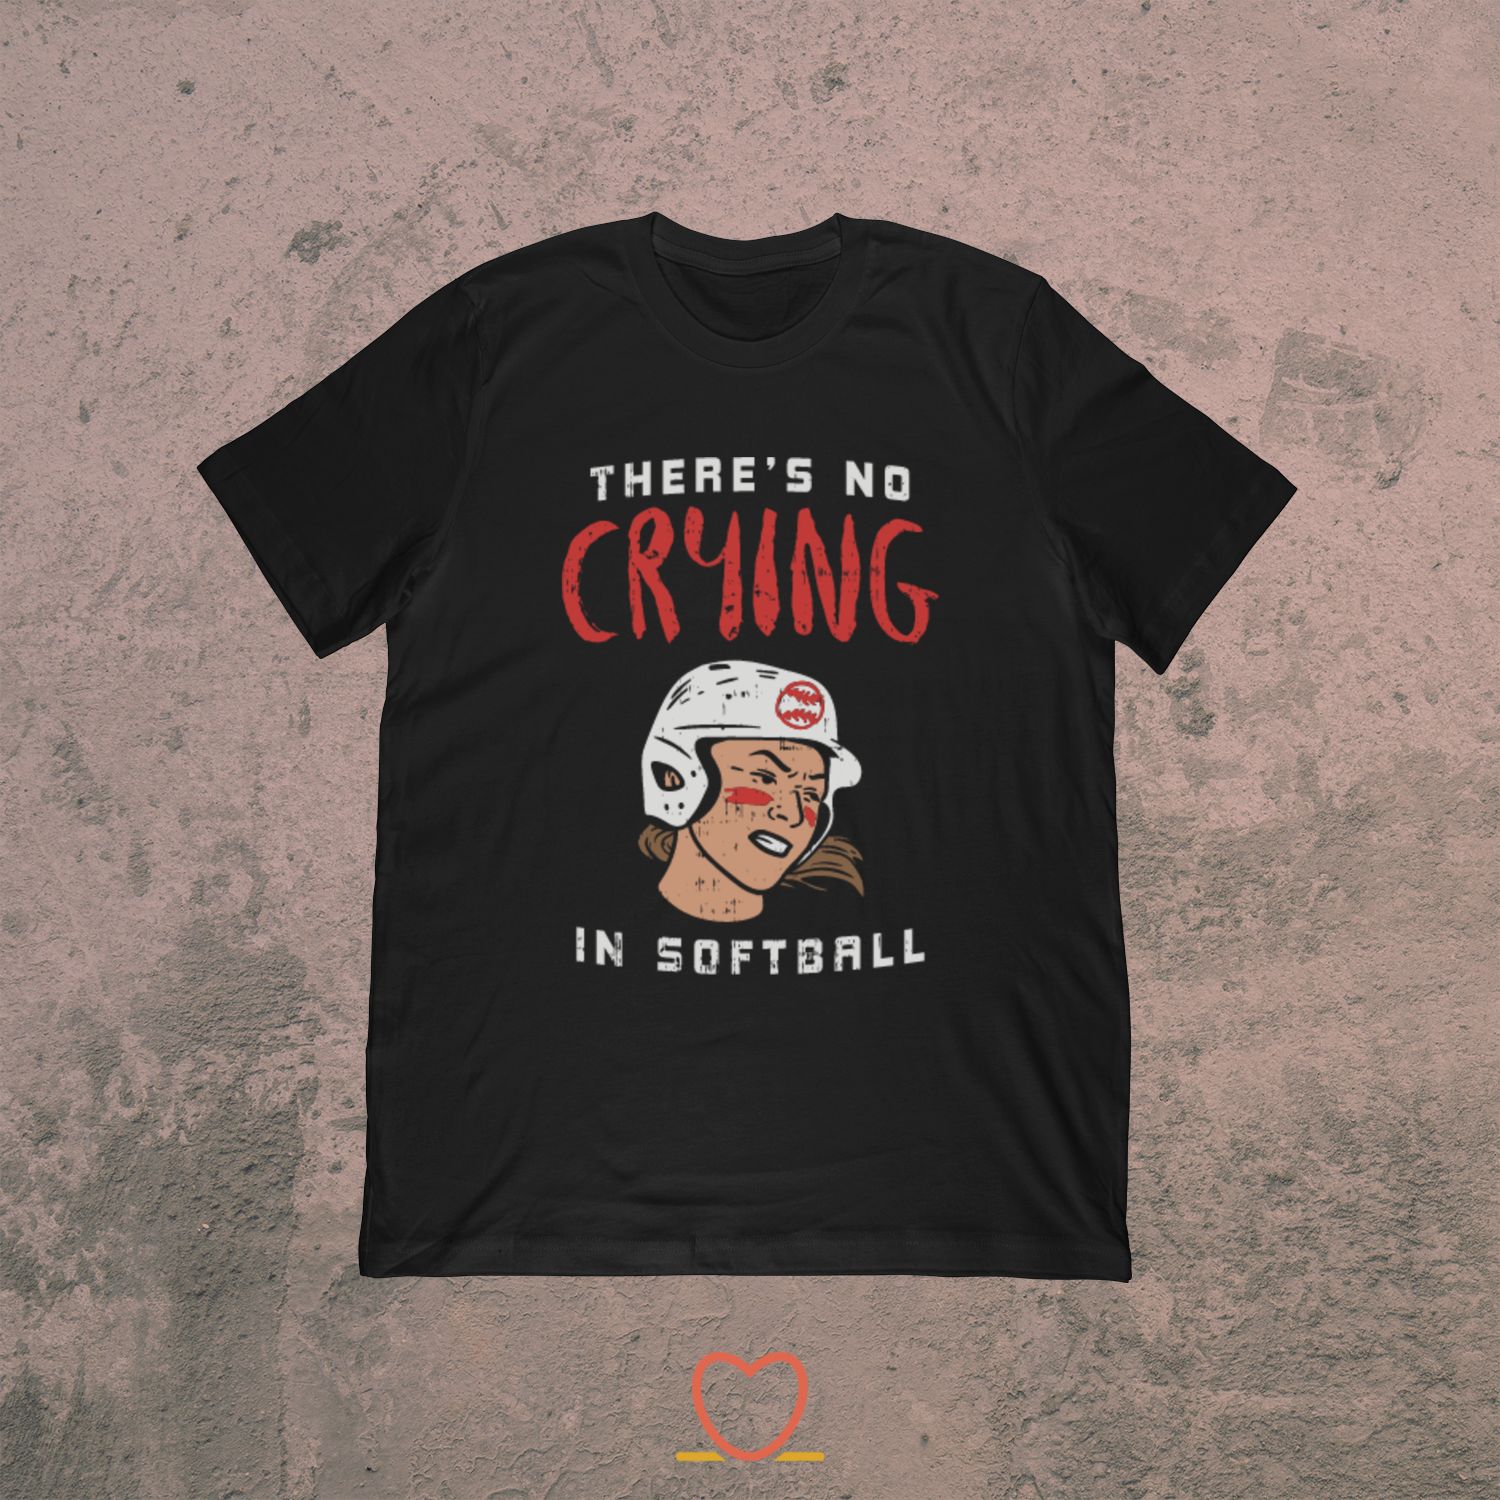 There’s No Crying In Softball – Funny Sports Tee